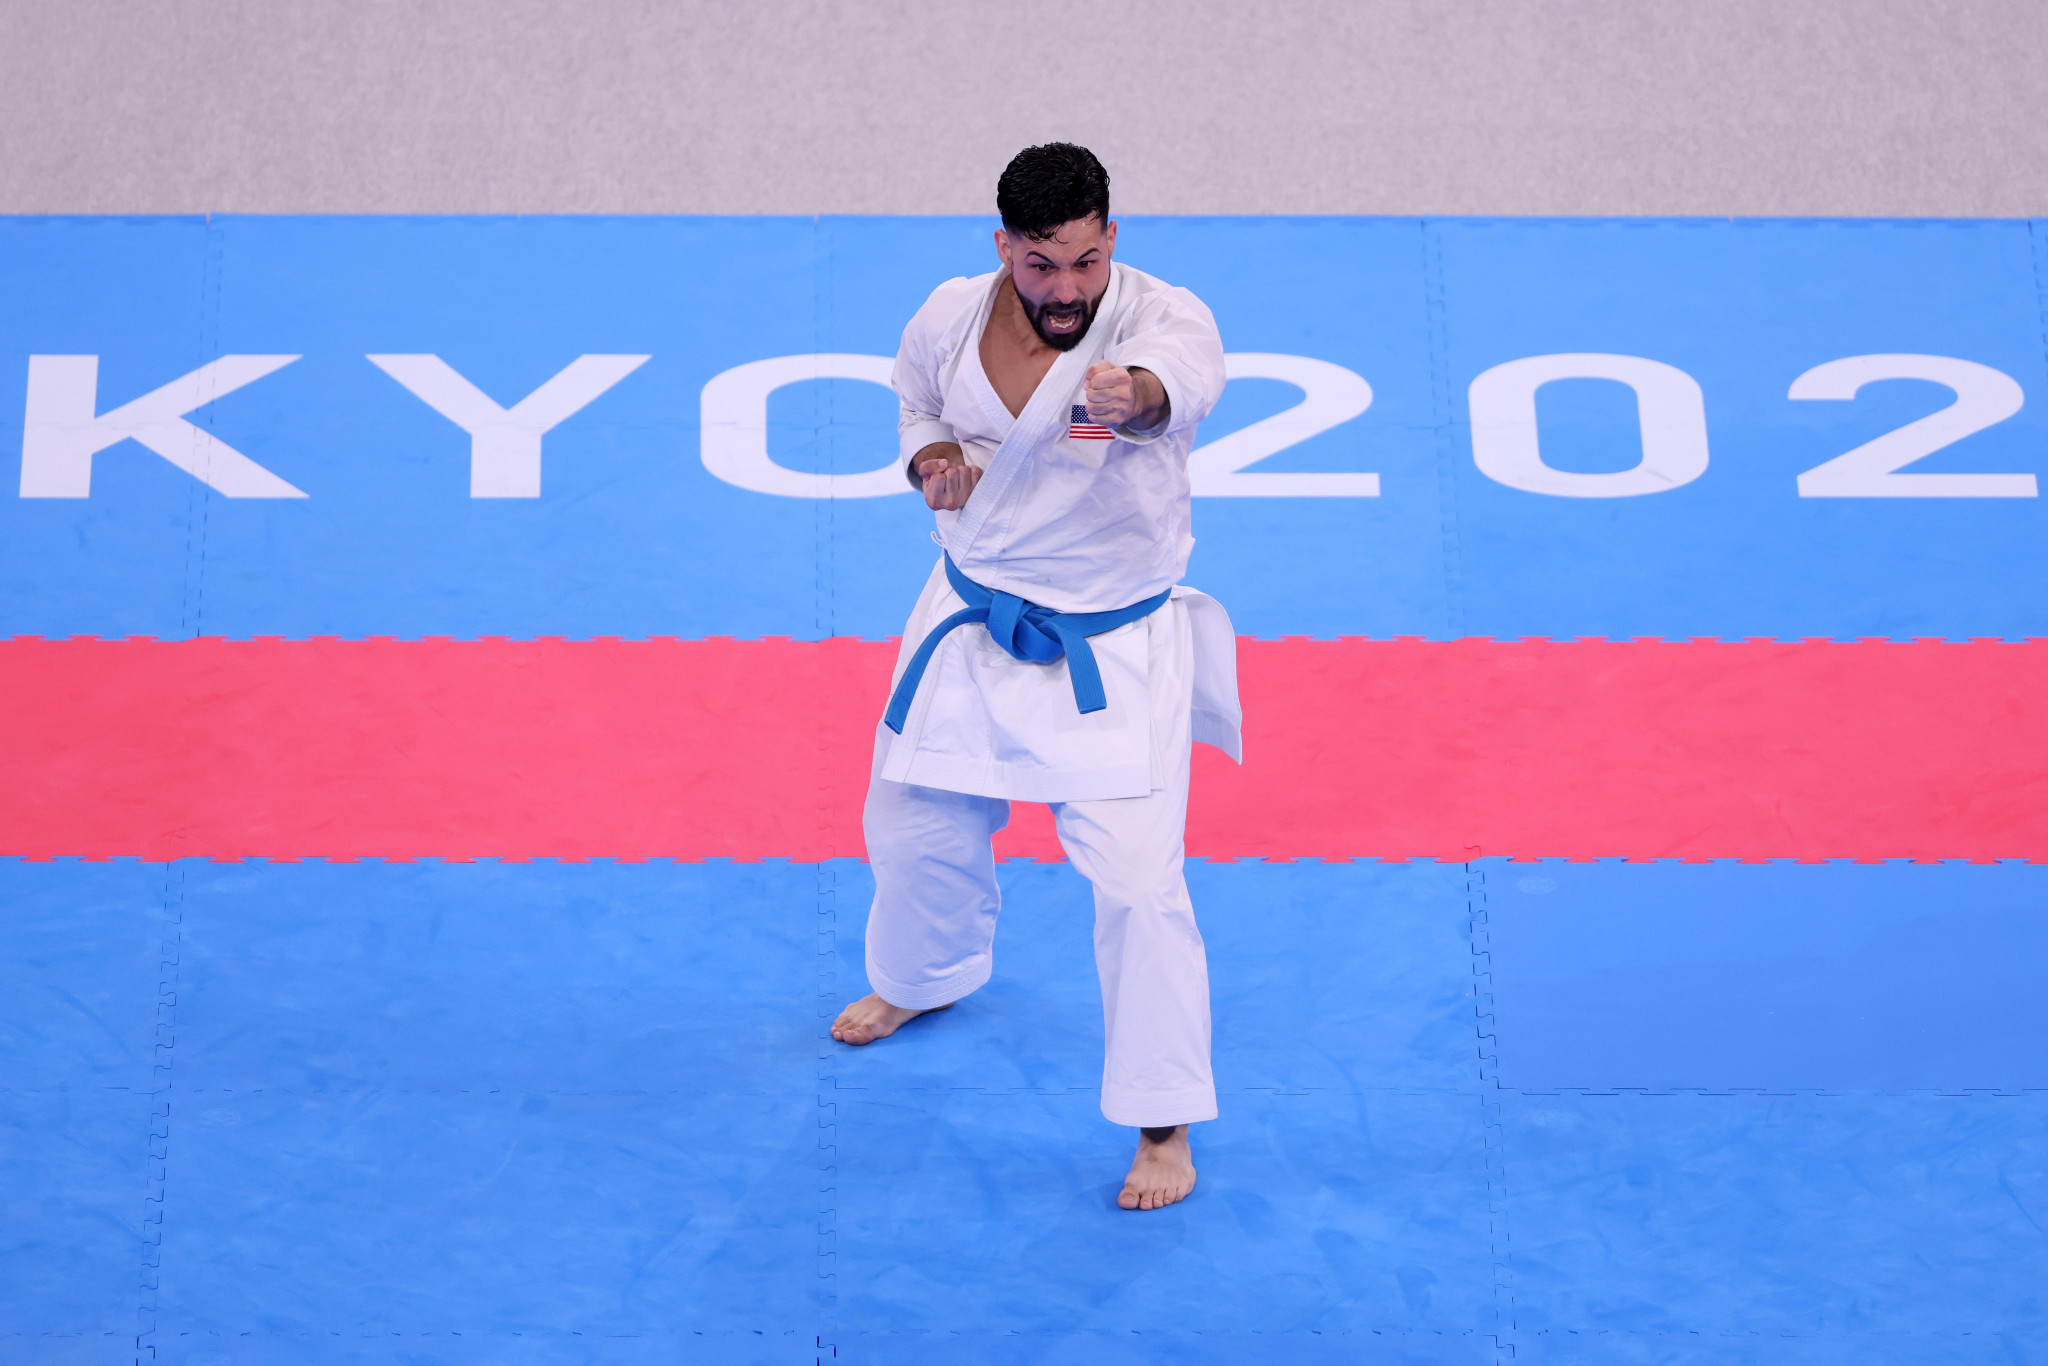 Ariel Torres backed up his bronze medal success at Tokyo 2020 to become the Pan American champion in Uruguay ©Getty Images 